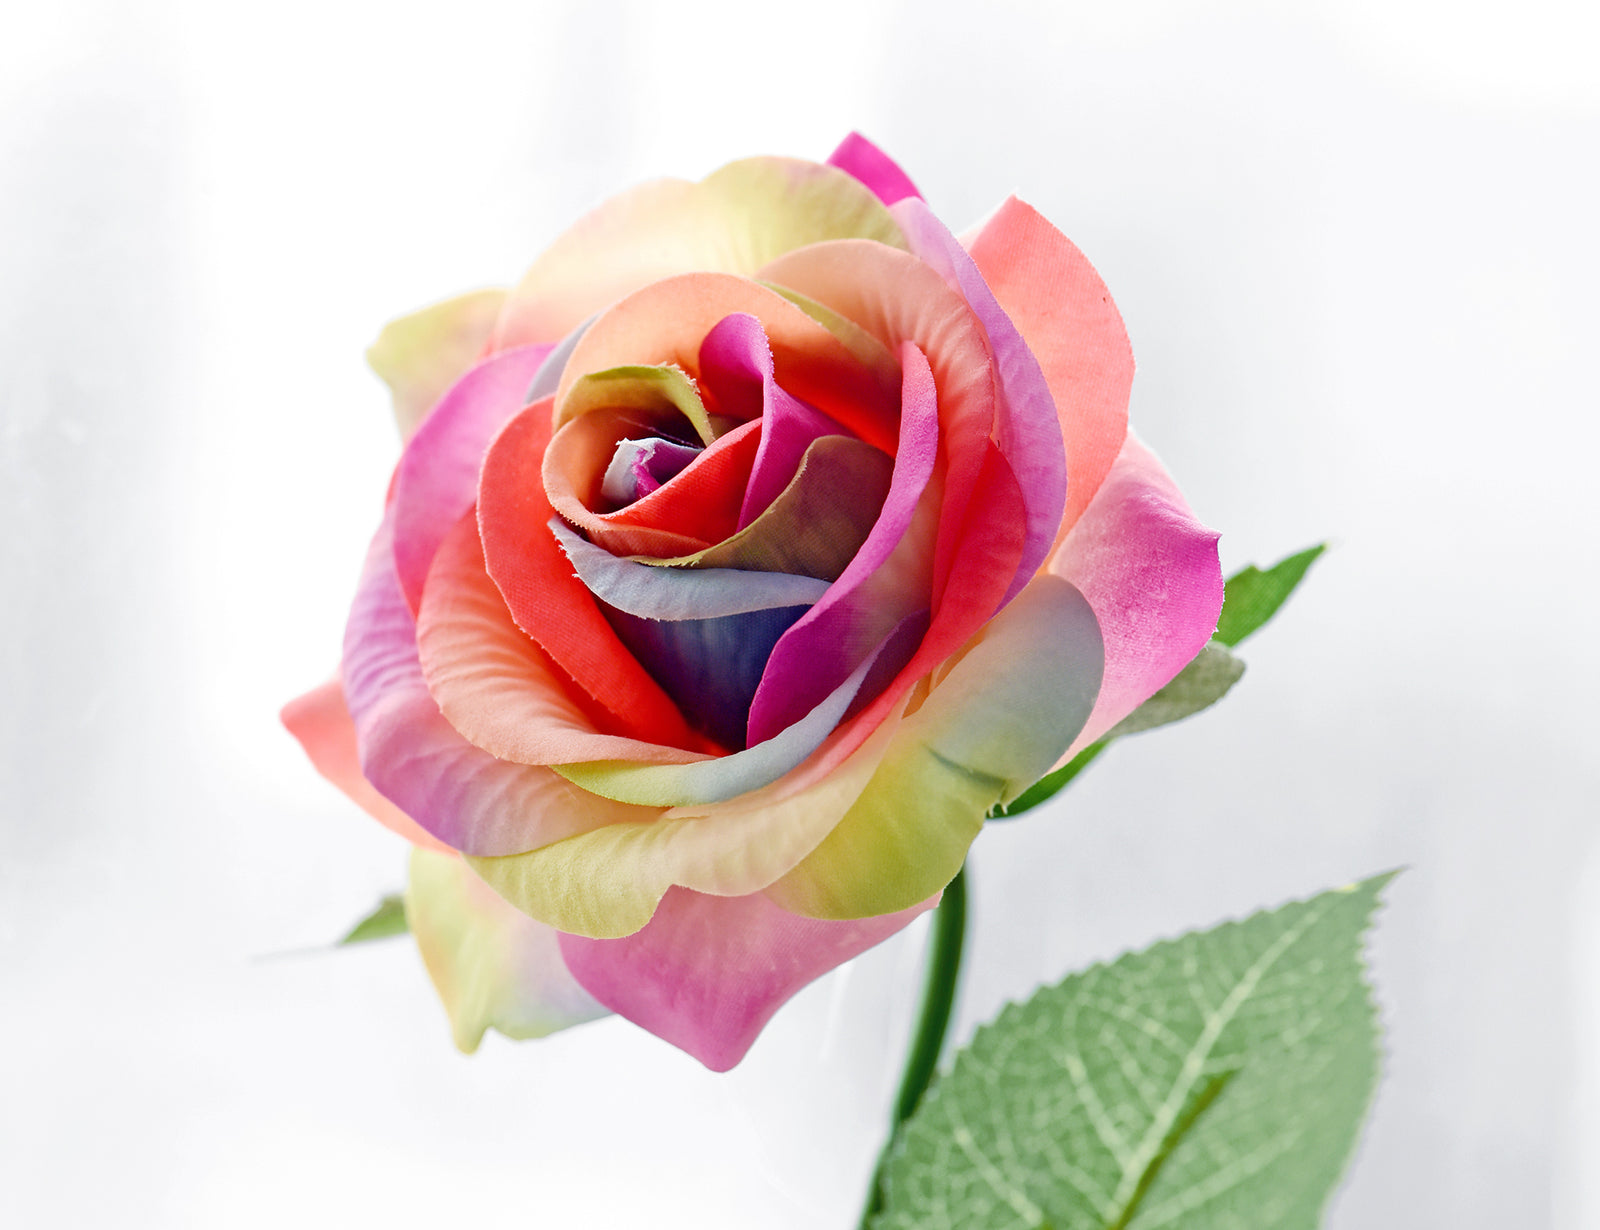 Rainbow Real Touch Silk Artificial Flowers ‘Petals Feel and Look like Fresh Roses 10 Stems